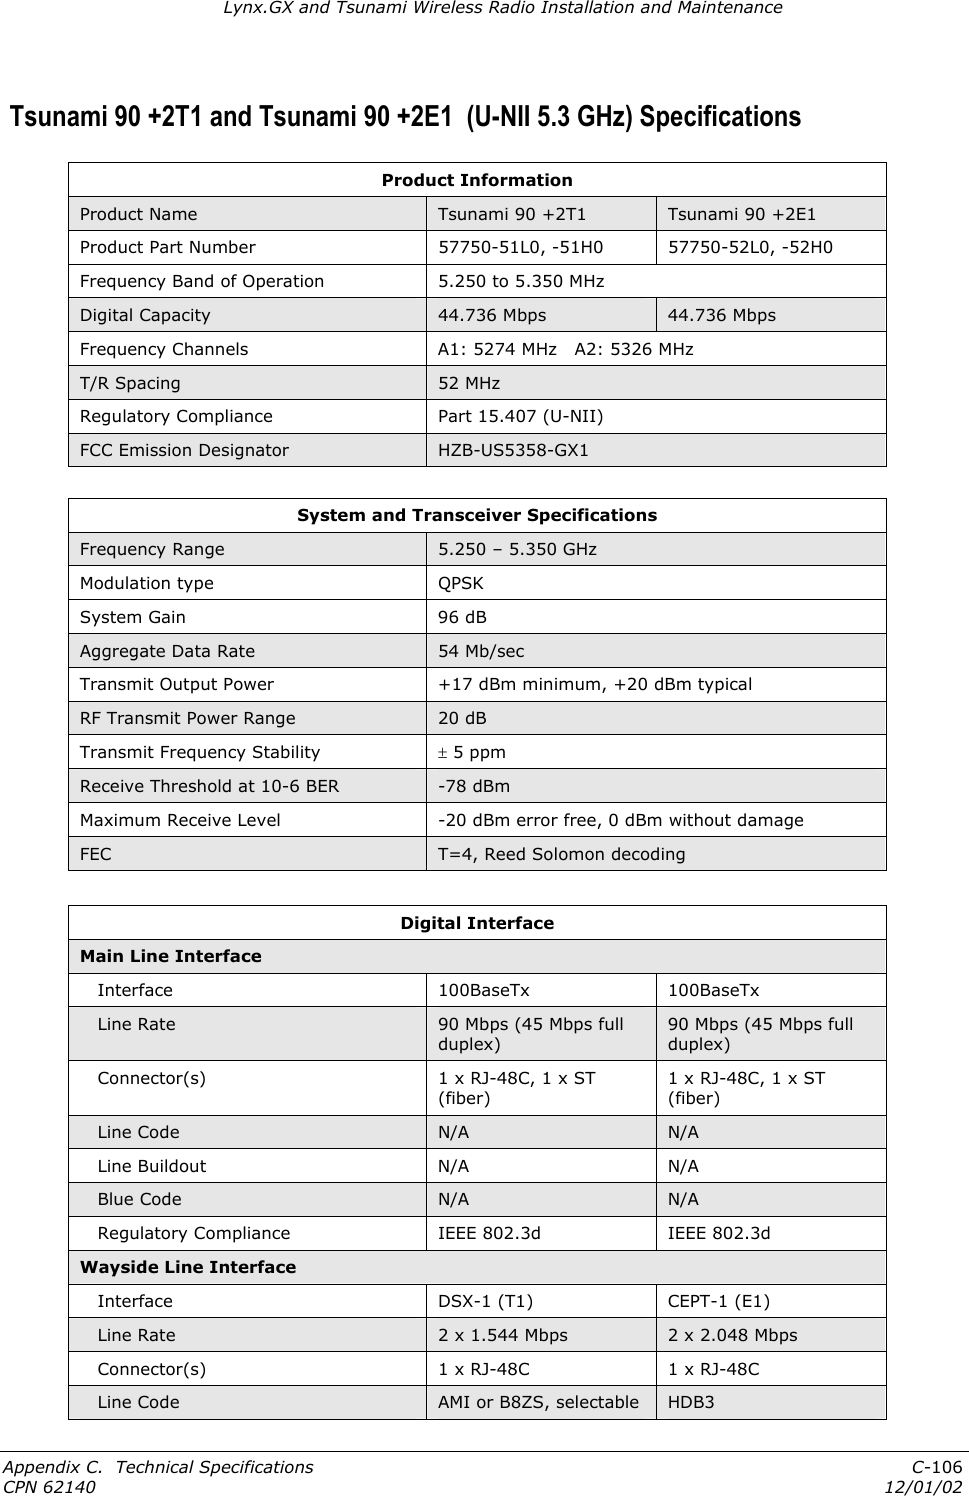 Lynx.GX and Tsunami Wireless Radio Installation and Maintenance  Tsunami 90 +2T1 and Tsunami 90 +2E1  (U-NII 5.3 GHz) Specifications Product Information Product Name  Tsunami 90 +2T1  Tsunami 90 +2E1 Product Part Number  57750-51L0, -51H0  57750-52L0, -52H0 Frequency Band of Operation  5.250 to 5.350 MHz Digital Capacity  44.736 Mbps  44.736 Mbps Frequency Channels  A1: 5274 MHz   A2: 5326 MHz T/R Spacing  52 MHz Regulatory Compliance  Part 15.407 (U-NII) FCC Emission Designator  HZB-US5358-GX1  System and Transceiver Specifications Frequency Range  5.250 – 5.350 GHz Modulation type  QPSK System Gain  96 dB Aggregate Data Rate  54 Mb/sec Transmit Output Power  +17 dBm minimum, +20 dBm typical RF Transmit Power Range  20 dB Transmit Frequency Stability  ± 5 ppm  Receive Threshold at 10-6 BER  -78 dBm Maximum Receive Level  -20 dBm error free, 0 dBm without damage FEC  T=4, Reed Solomon decoding  Digital Interface Main Line Interface    Interface  100BaseTx  100BaseTx    Line Rate  90 Mbps (45 Mbps full duplex) 90 Mbps (45 Mbps full duplex)    Connector(s)  1 x RJ-48C, 1 x ST (fiber) 1 x RJ-48C, 1 x ST (fiber)    Line Code  N/A  N/A    Line Buildout  N/A  N/A    Blue Code  N/A  N/A    Regulatory Compliance  IEEE 802.3d  IEEE 802.3d Wayside Line Interface    Interface  DSX-1 (T1)  CEPT-1 (E1)     Line Rate  2 x 1.544 Mbps  2 x 2.048 Mbps    Connector(s)  1 x RJ-48C  1 x RJ-48C    Line Code  AMI or B8ZS, selectable  HDB3 Appendix C.  Technical Specifications  C-106 CPN 62140  12/01/02 